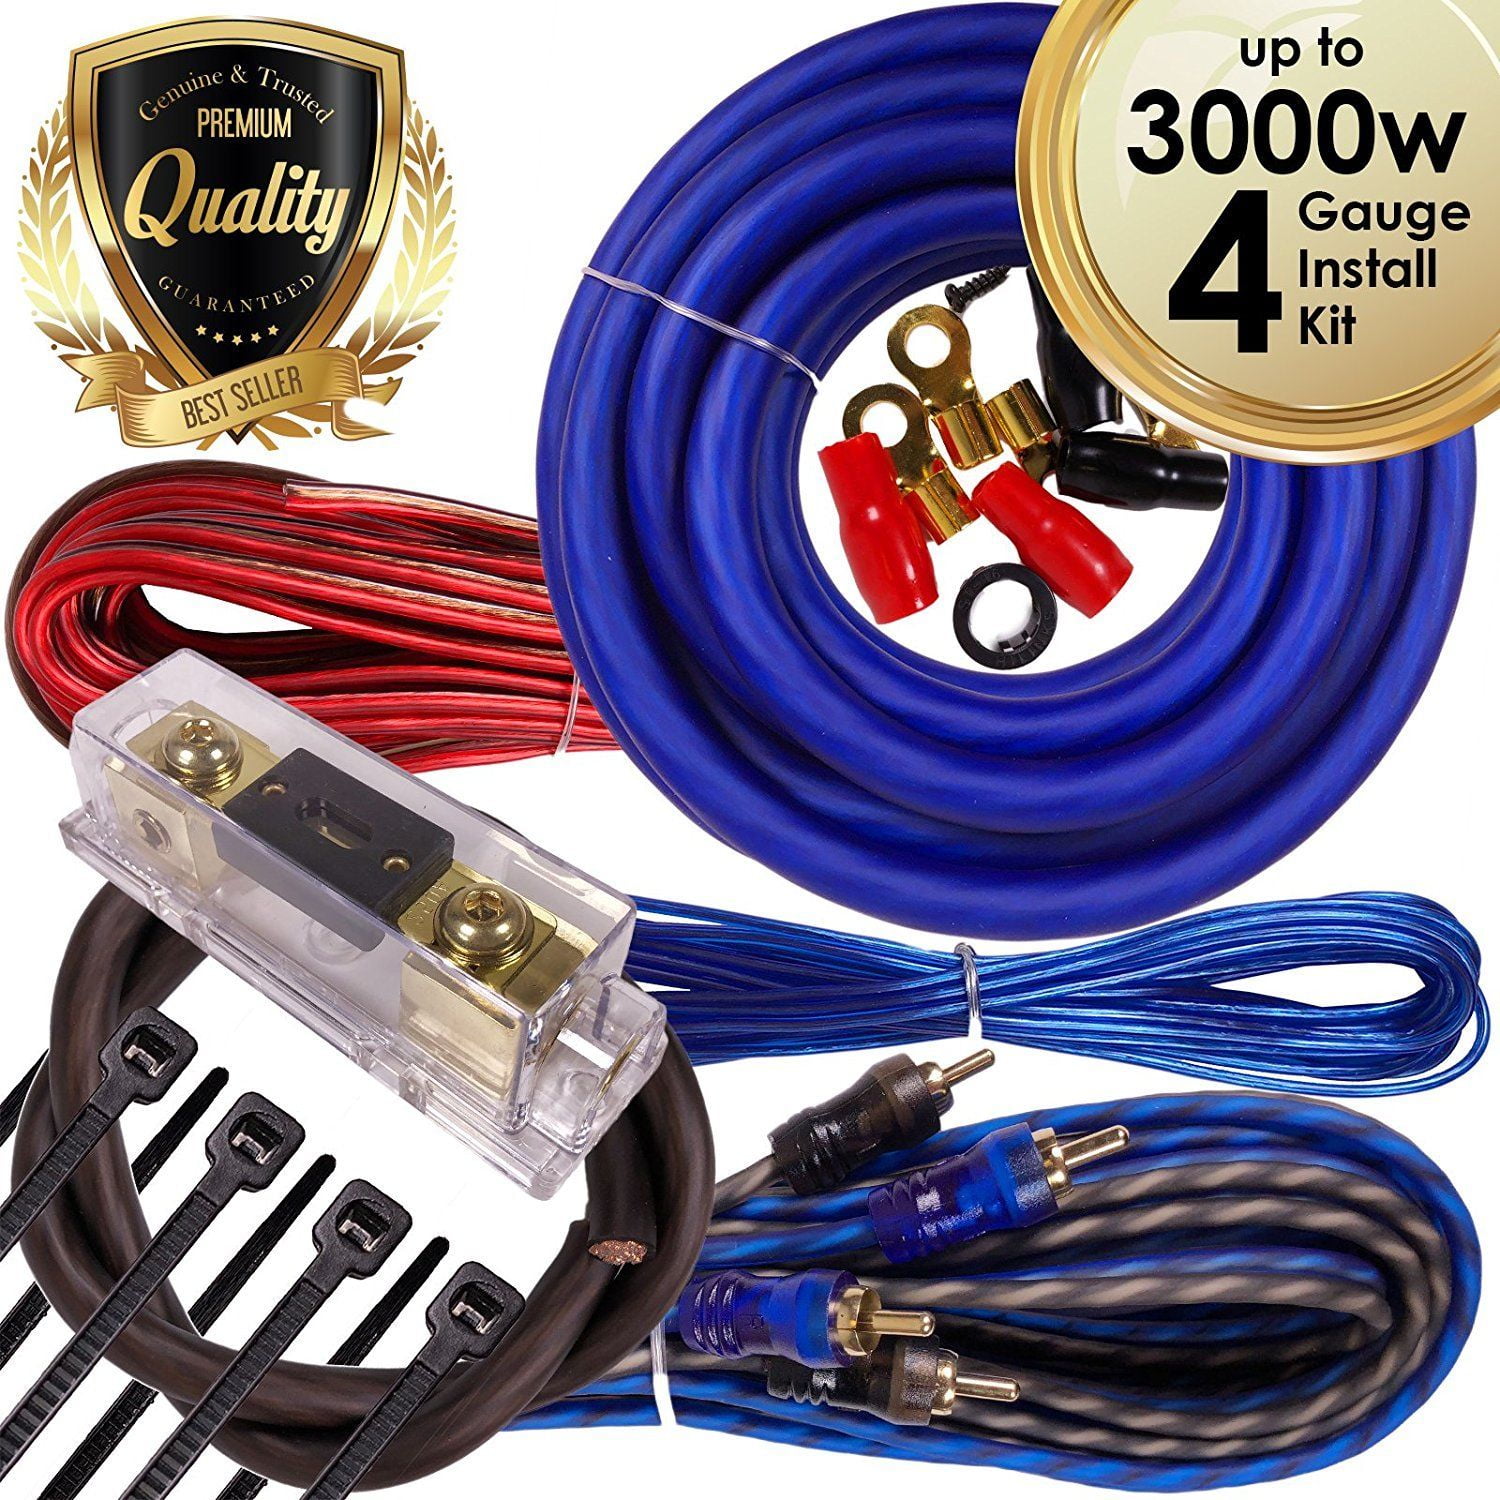 0 Gauge Amplfier Power Kit for Amp Install Wiring Green 1/0 Ga Cables 4500W 